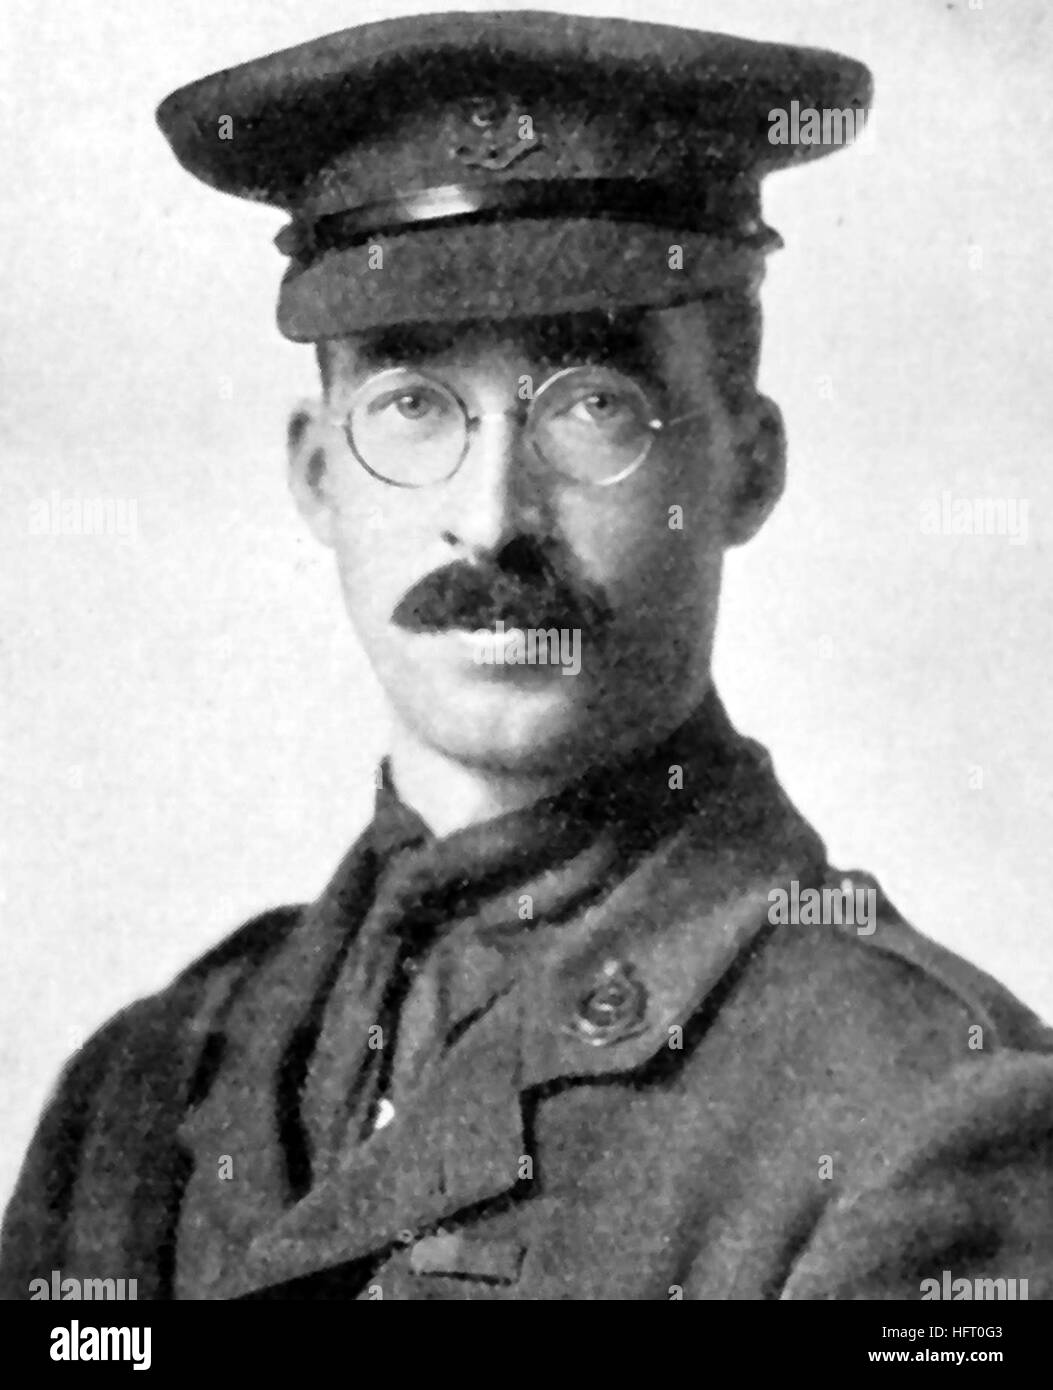 FRANCIS SCRIMGER VC (1880-1937) Canadian Army Medical Corps who was awarded a VC for his actions during the Second Battle of Ypres in April 1915 Stock Photo